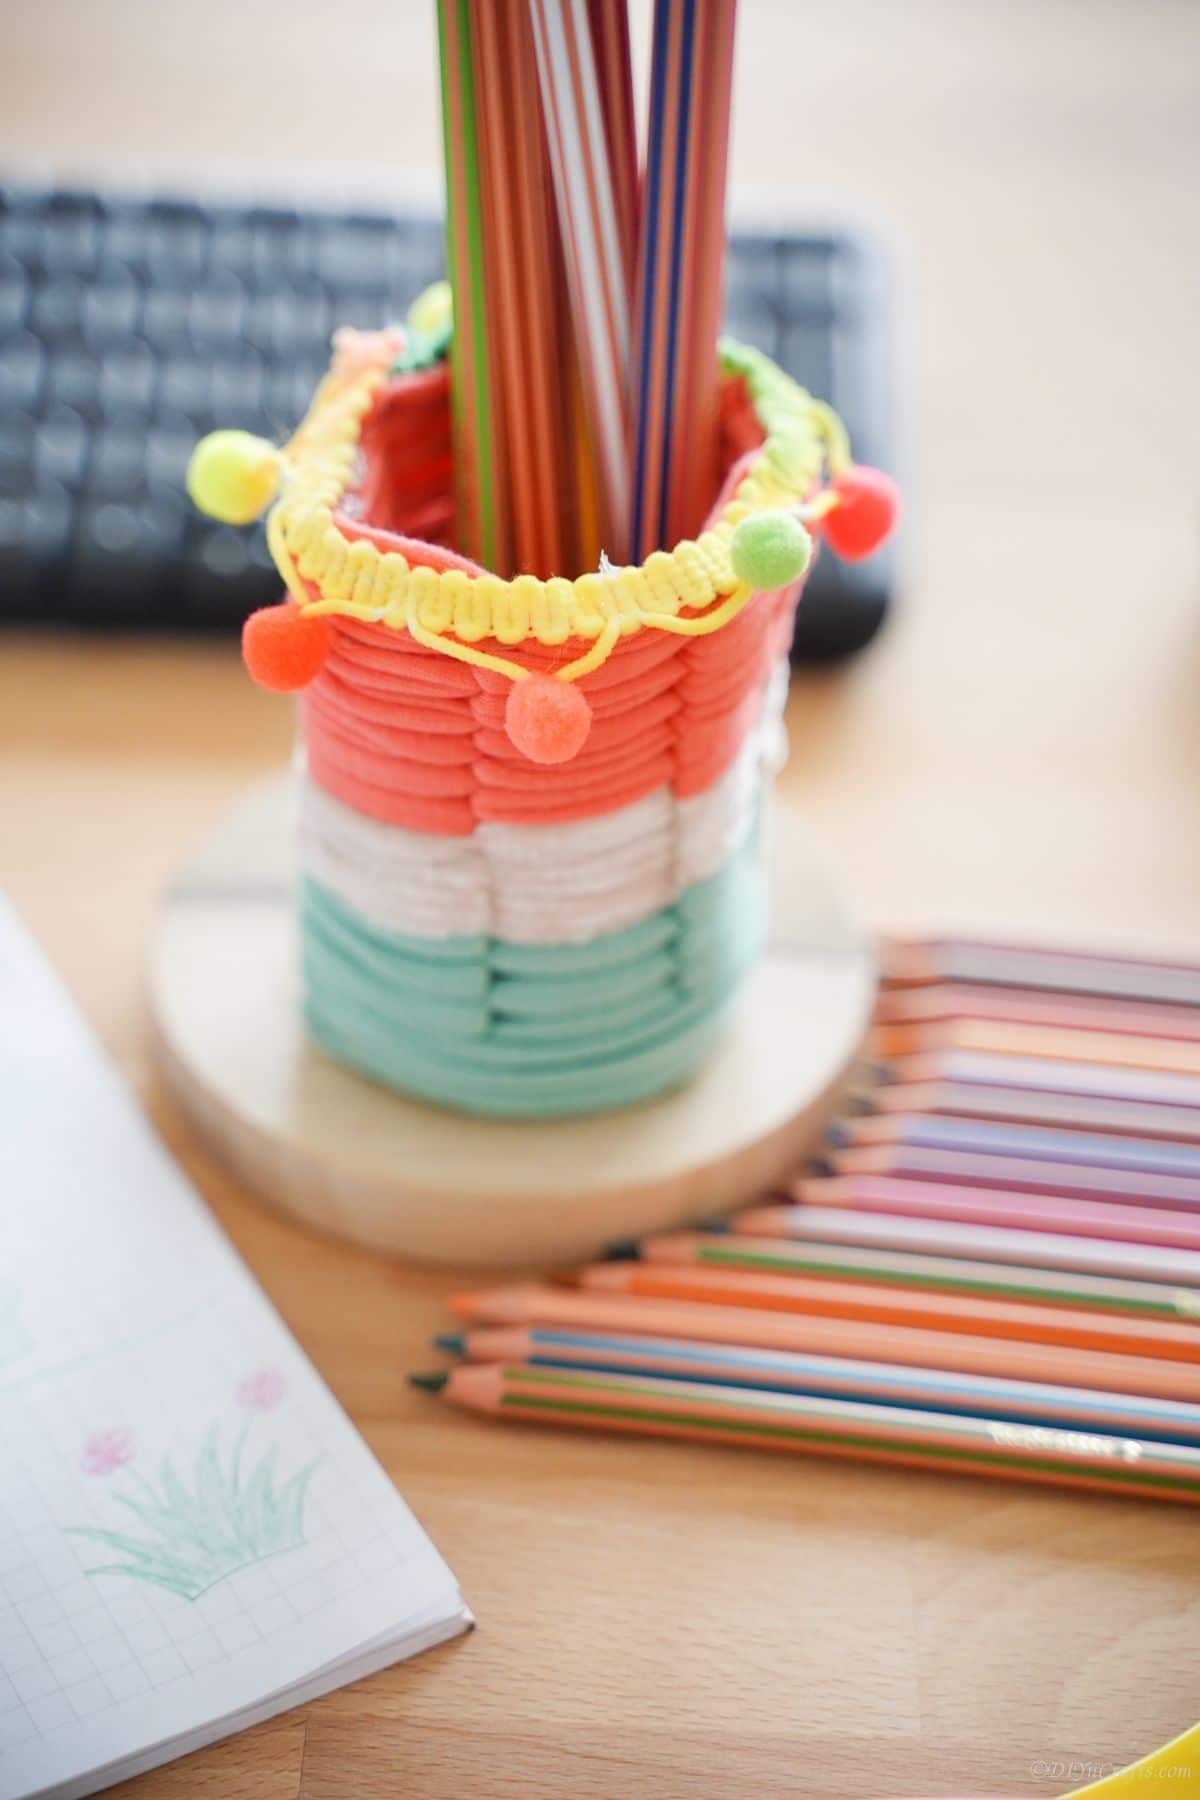 pencil holder on table next to colored pencils